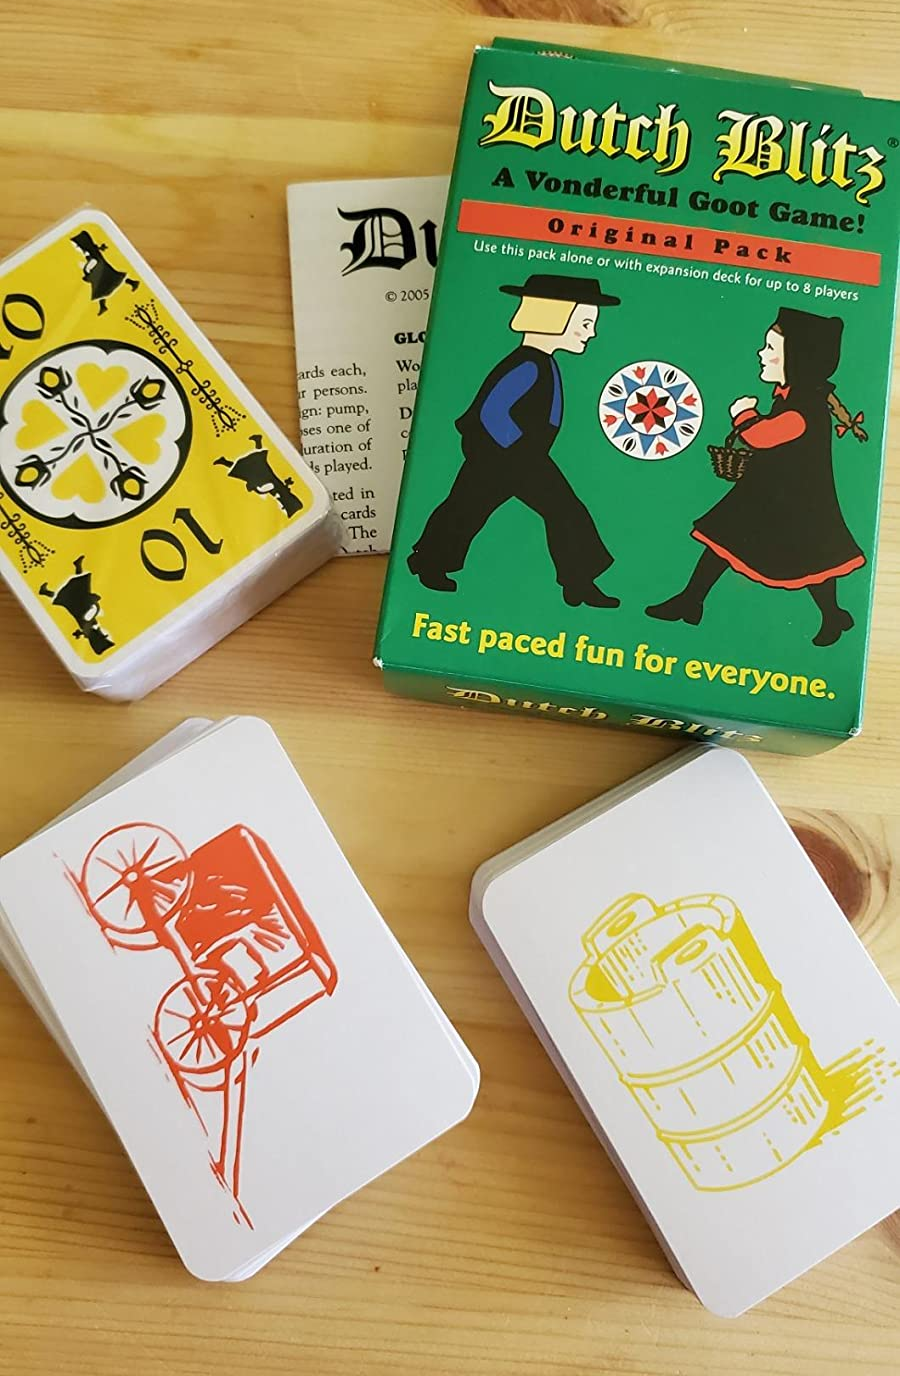 a reviewer photo of the card game box and two stacks of cards, one with a yellow bucket print and one with an orange carriage print 